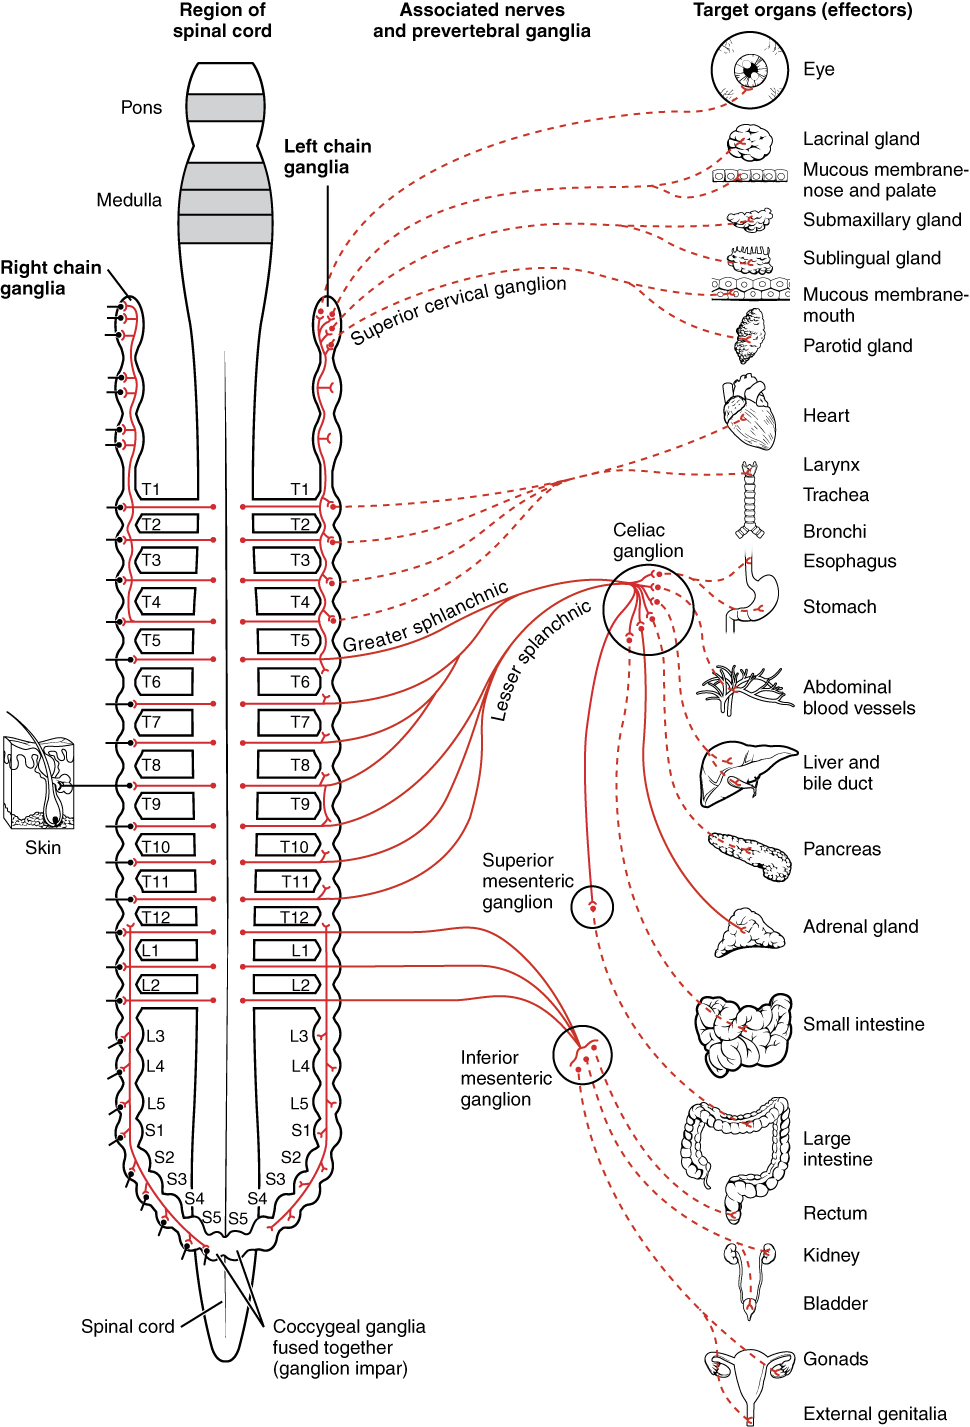 The Connections of the Sympathetic Nervous System